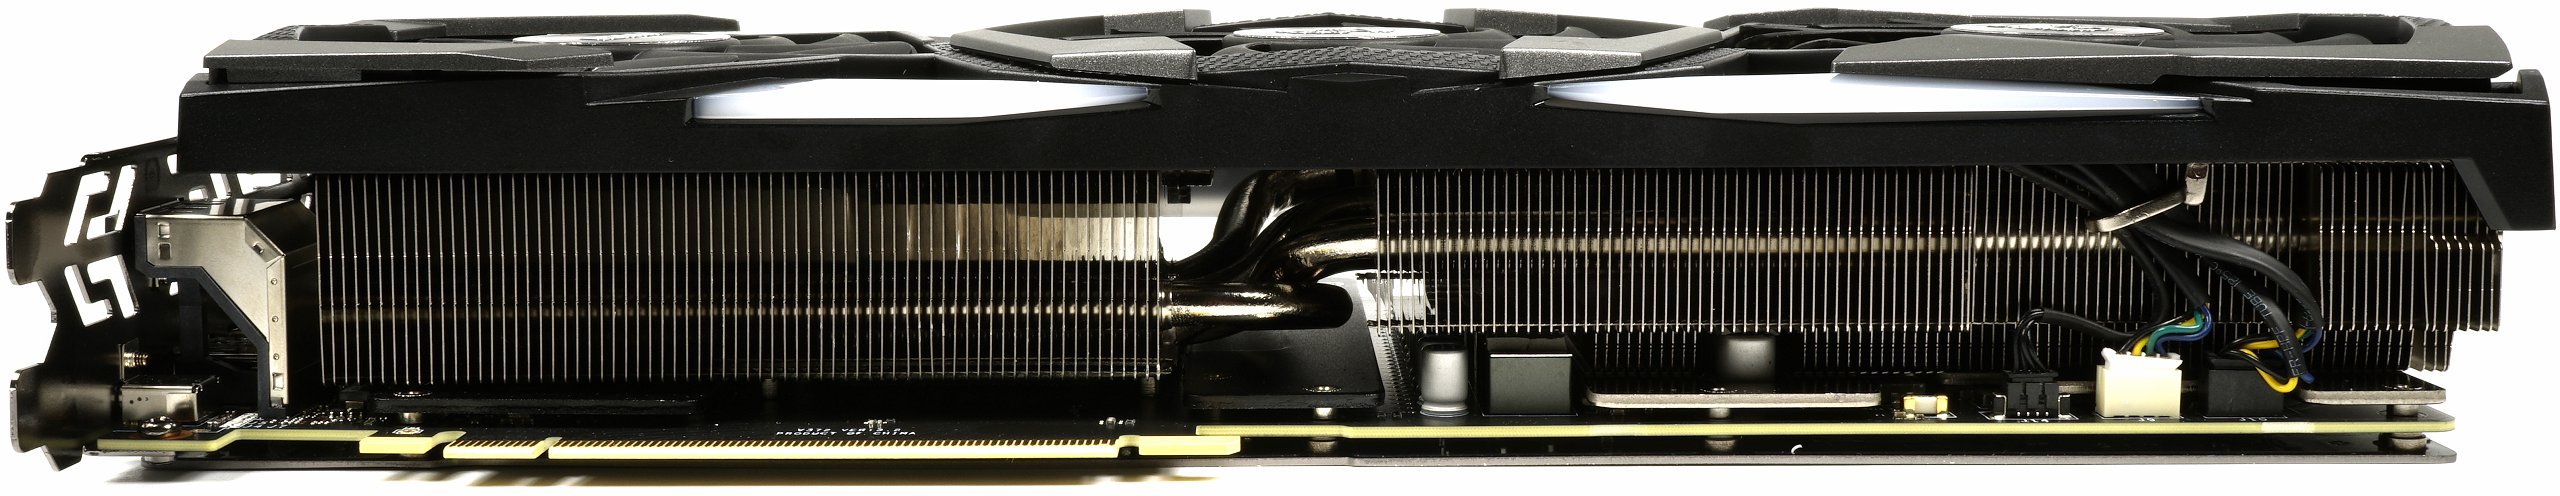 Image 4 : Test : MSI RTX 2080 Gaming X Trio, silencieuse et rapide